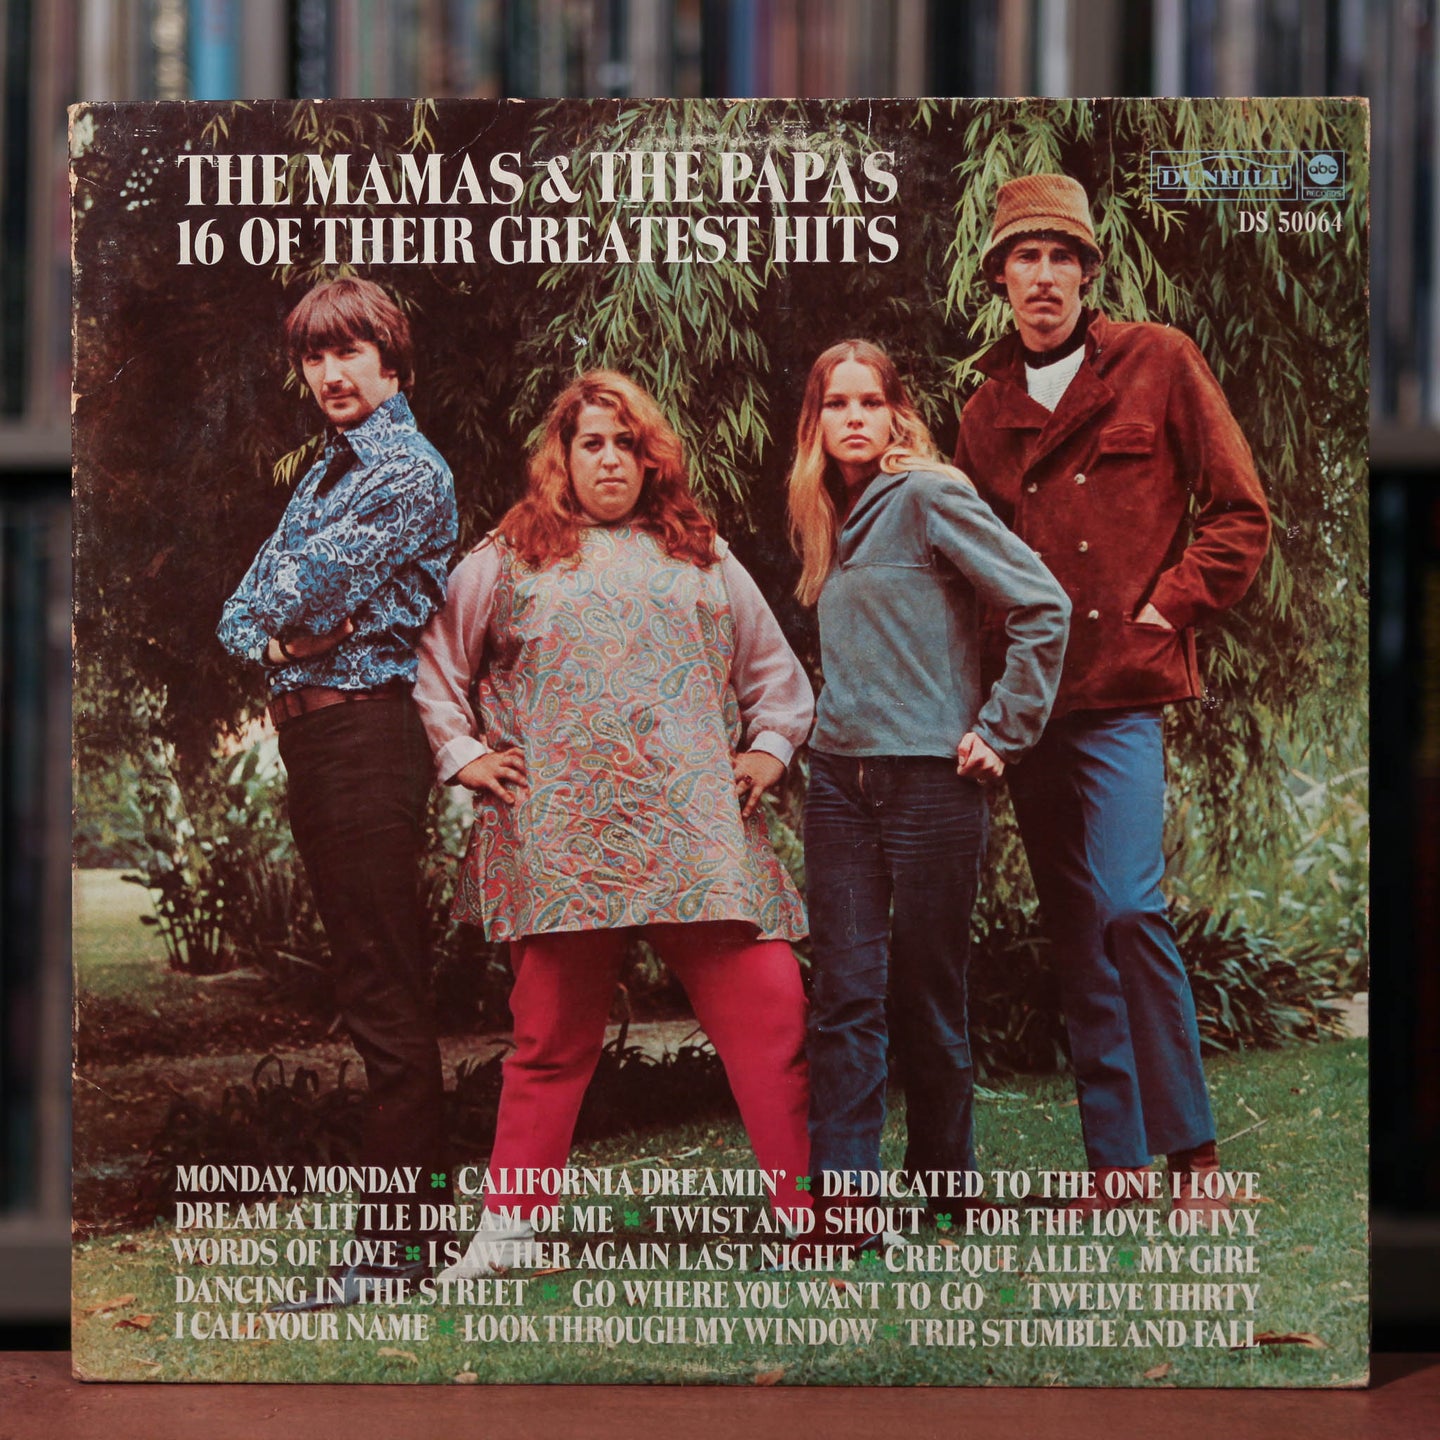 The Mamas & The Papas - 16 Of Their Greatest Hits - 1969 Dunhill, VG+/VG+